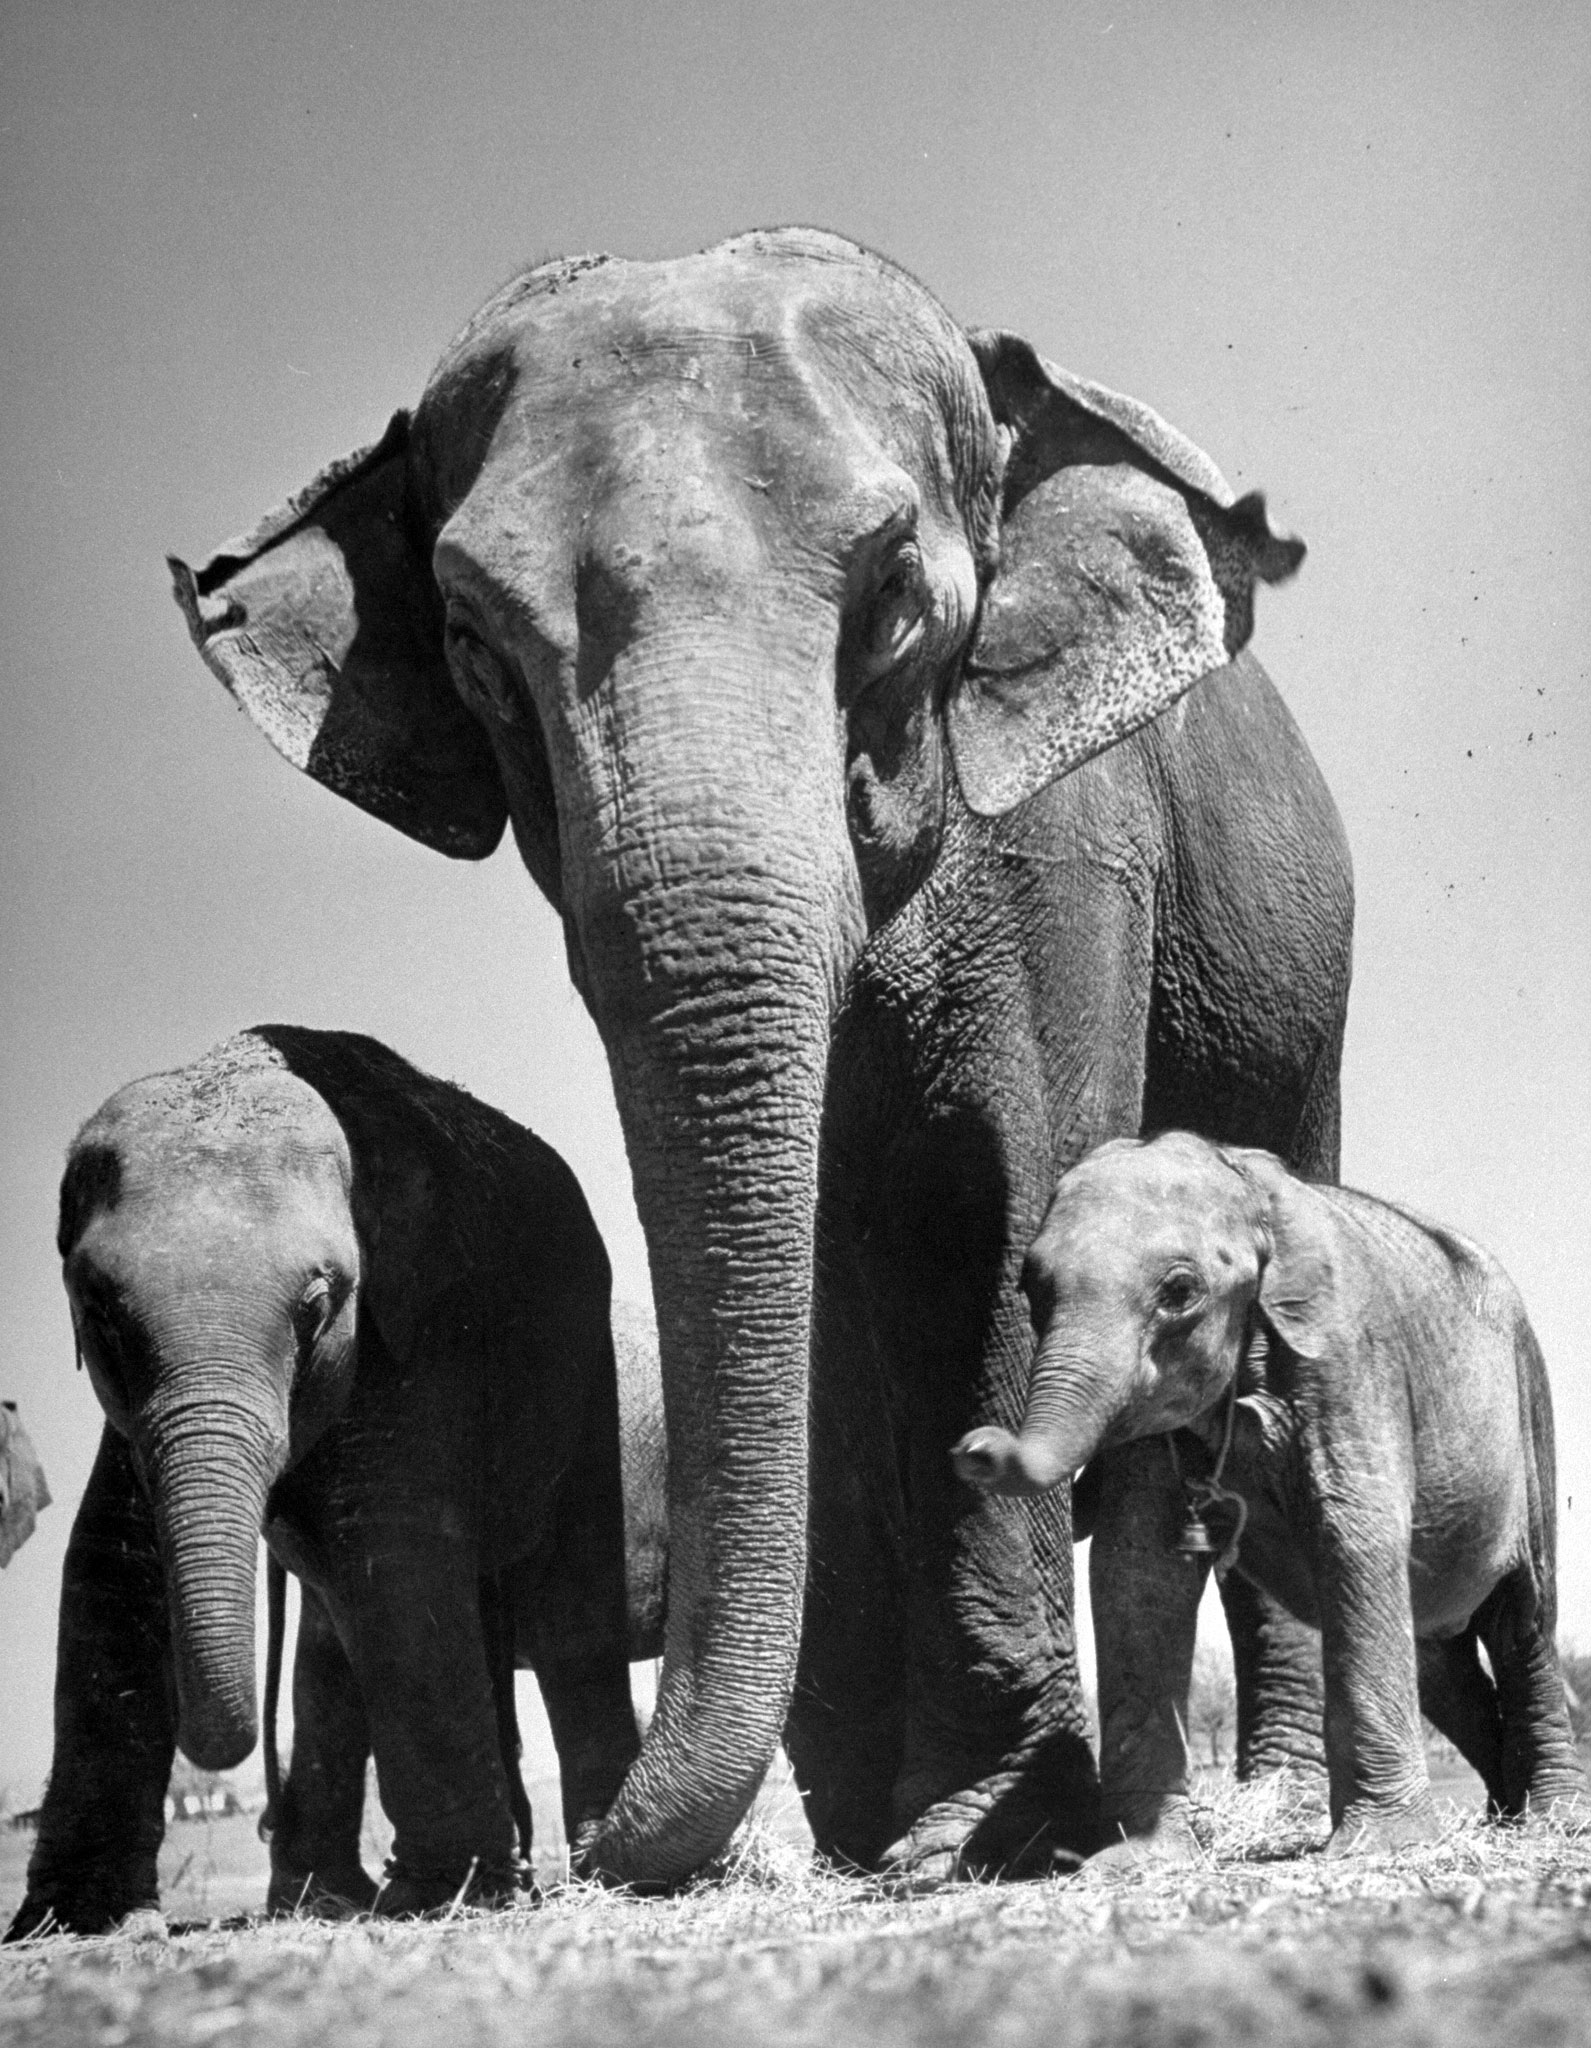 "Butch" (R), baby female Indian elephant, with other elephants in the Dailey Circus.